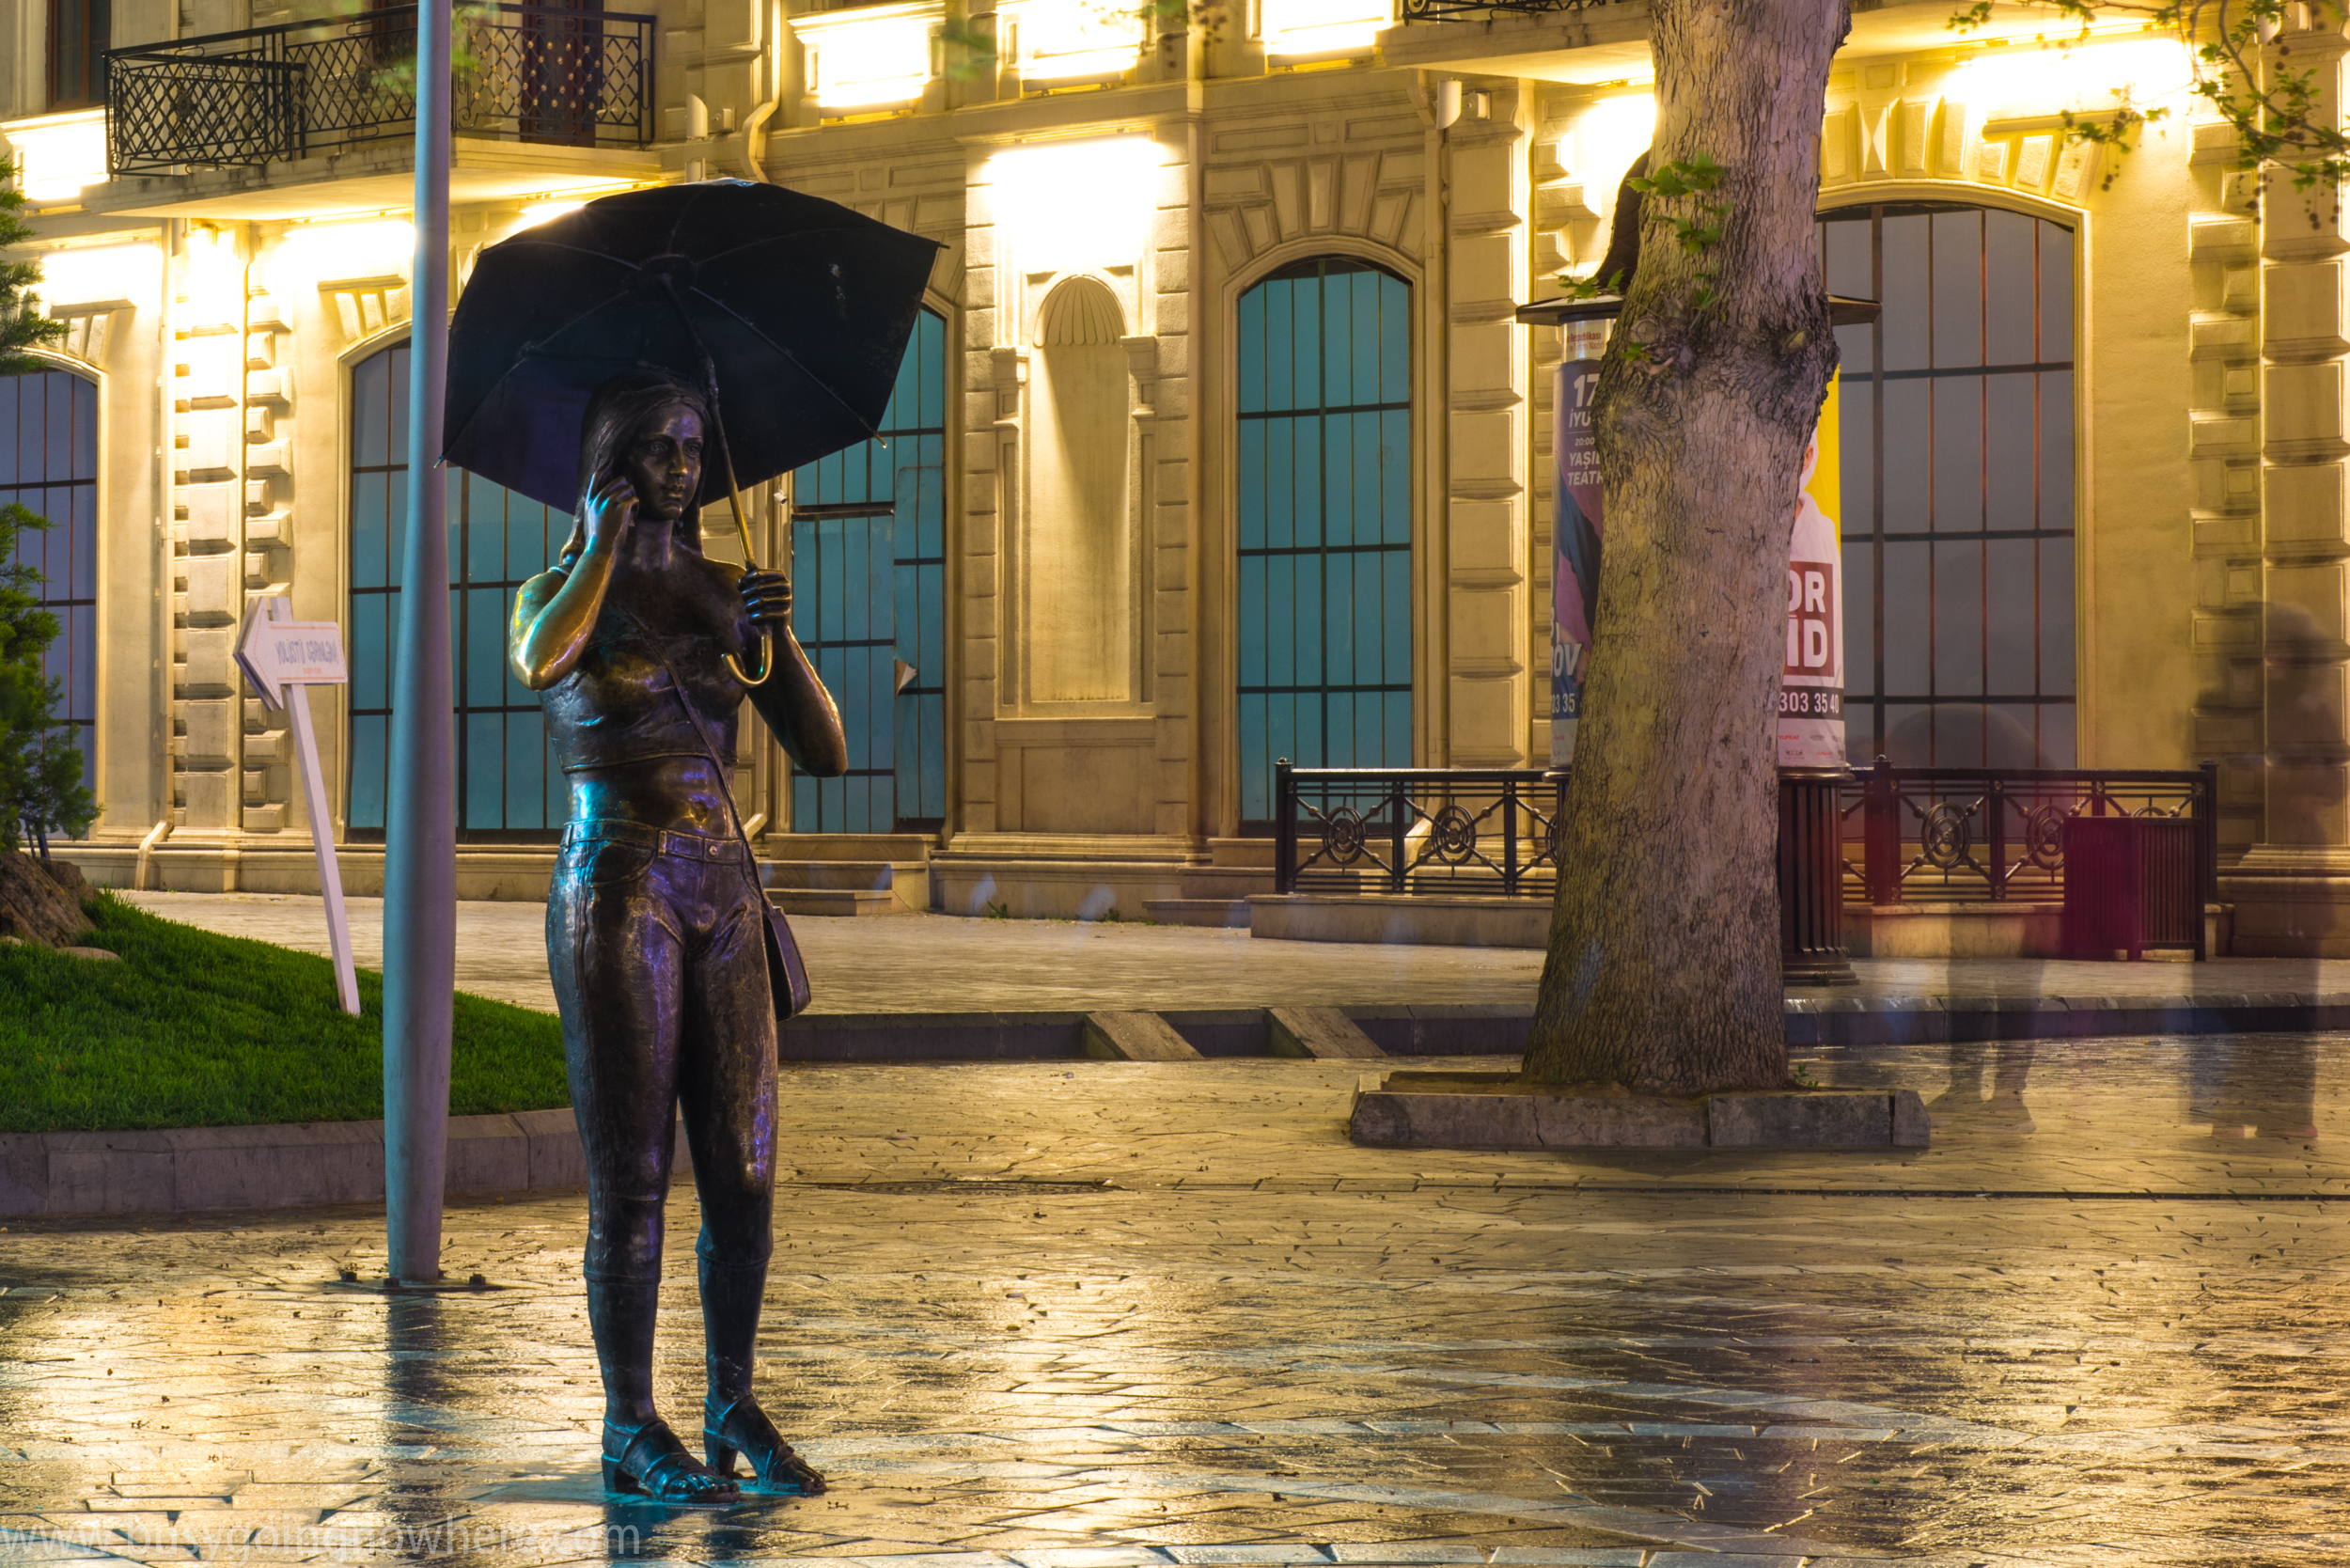 One of many cool statues. Girl with phone and umbrella